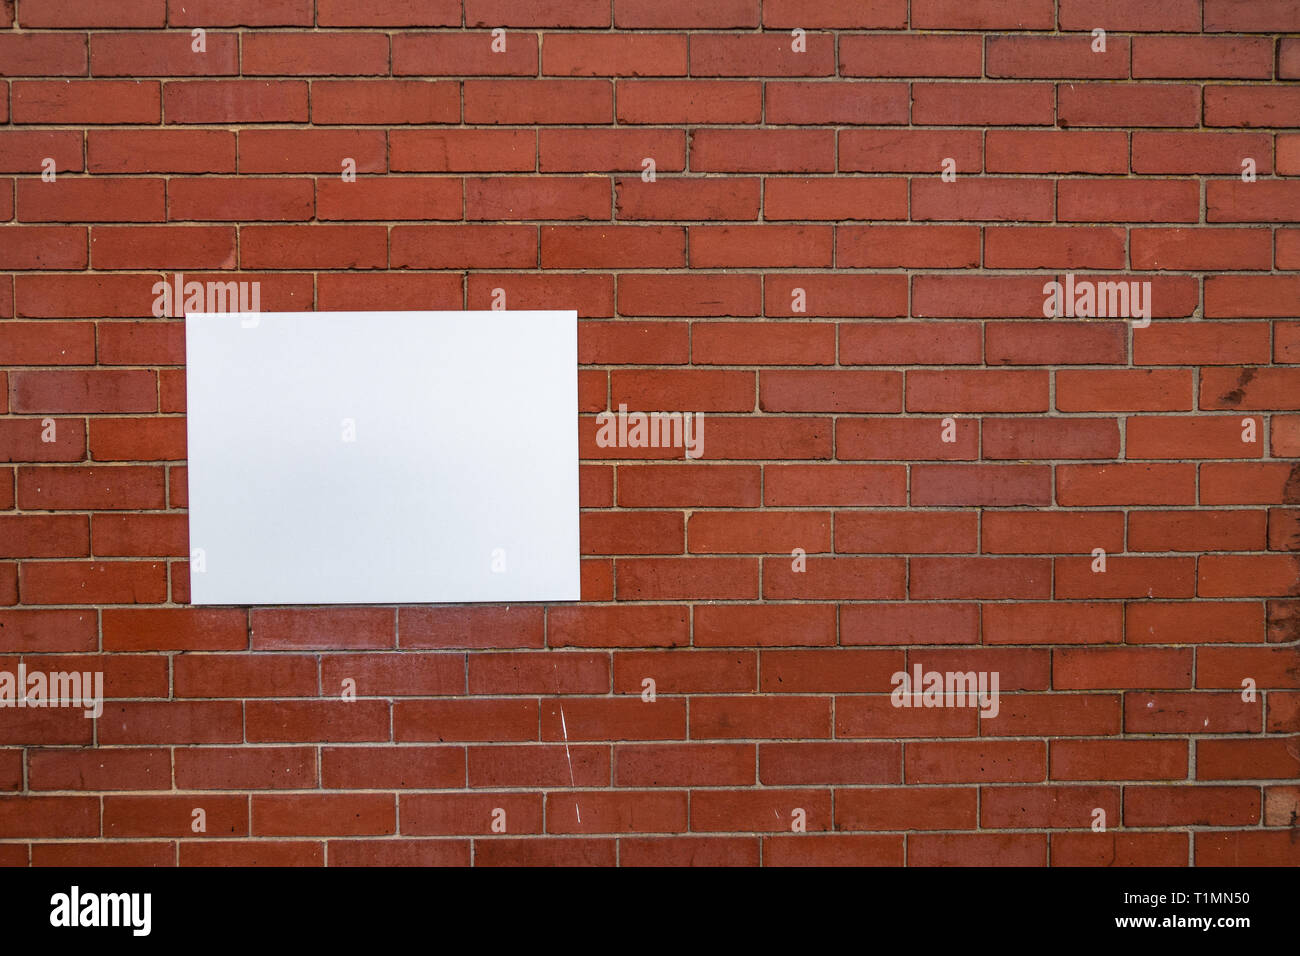 Abstract photograph of a Blank white rectangular sign panel fastened to a plain red brick wall Stock Photo